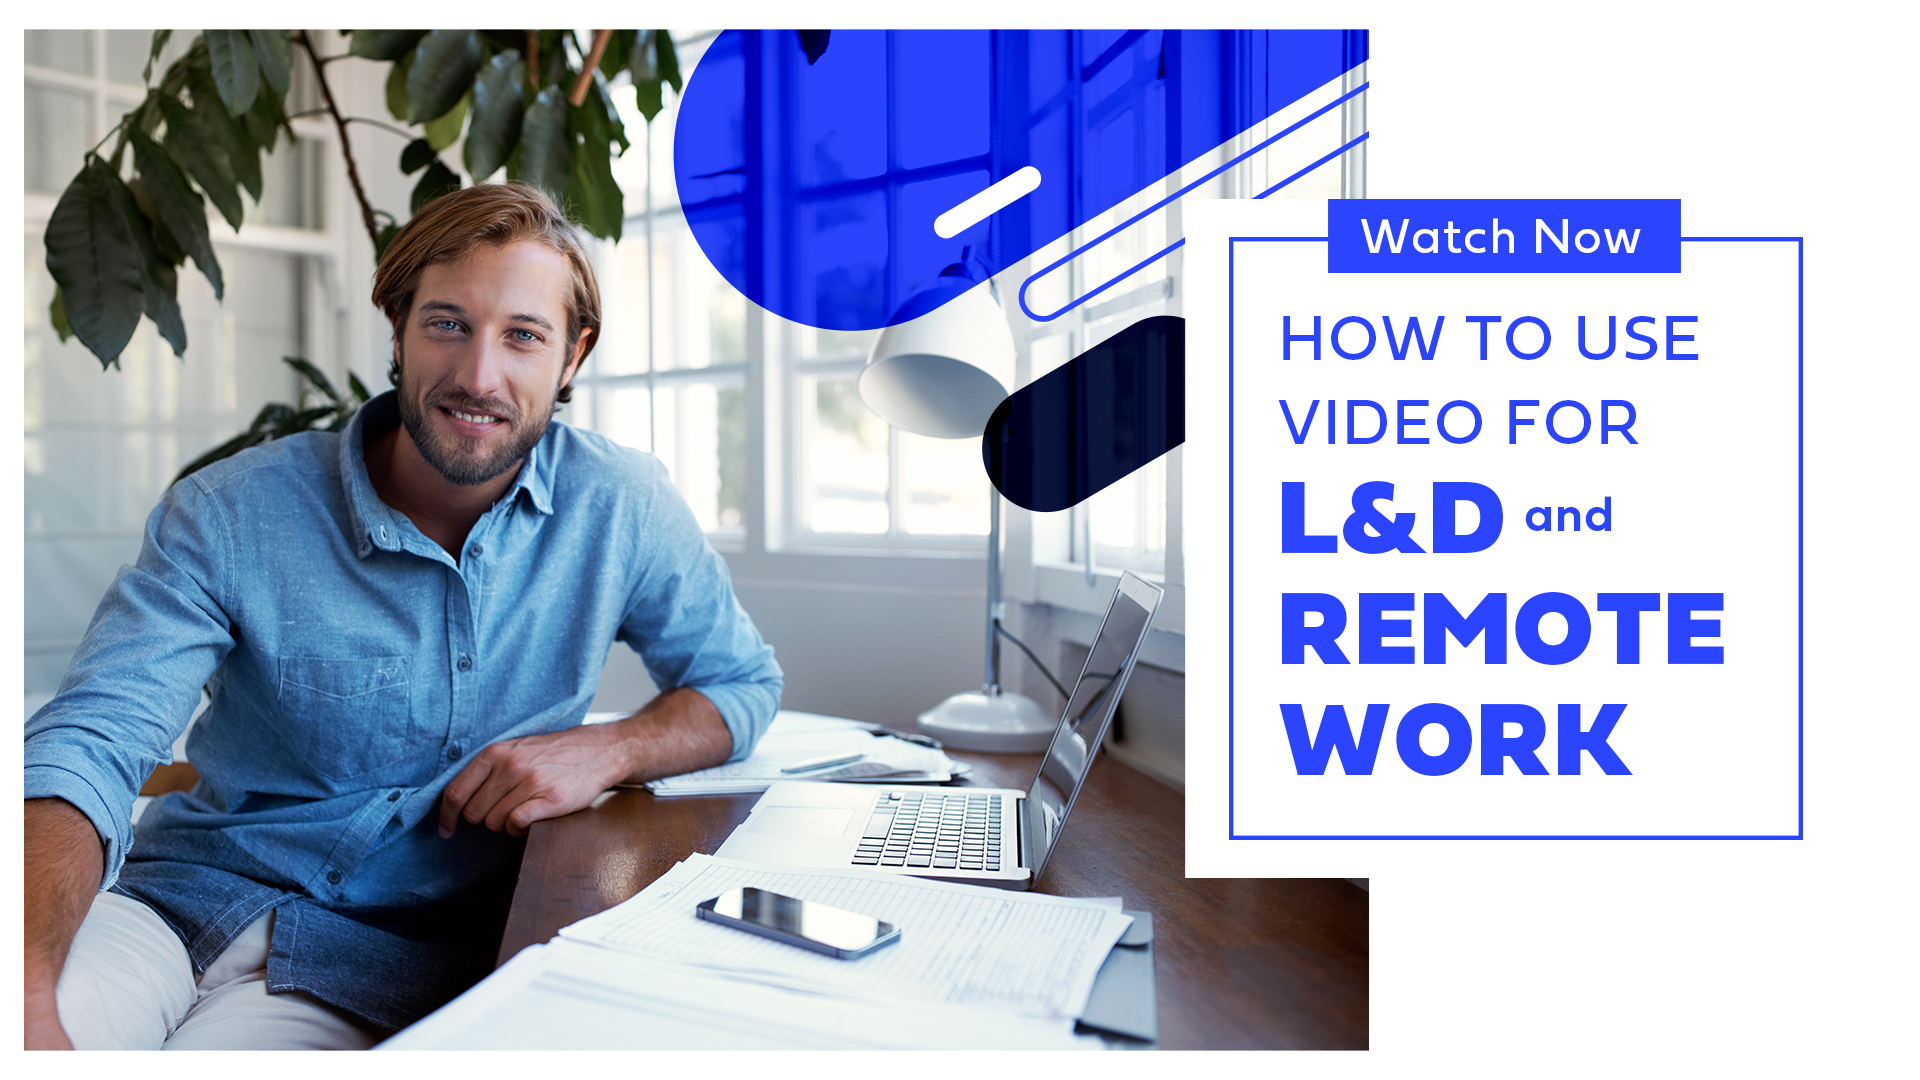 on demand video - how to use video for l&d and remote work